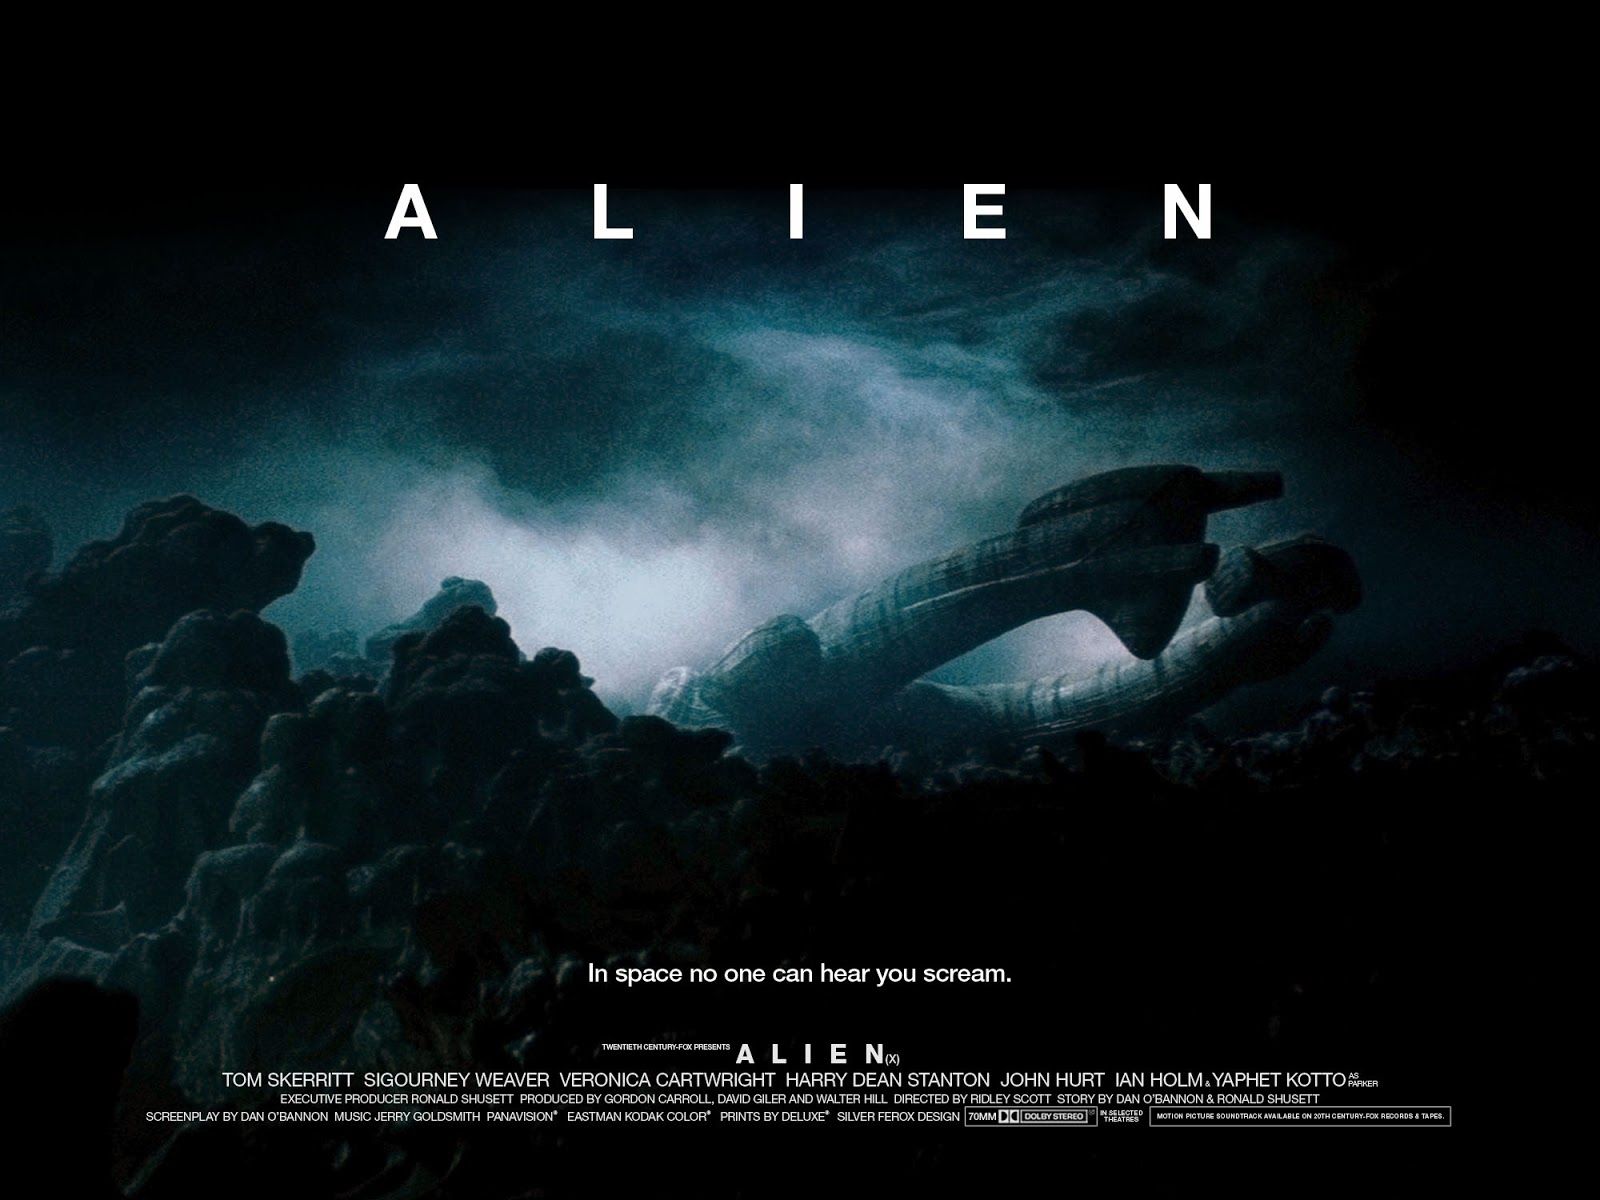 Alien: Still One of the Scariest Scares in Scary Horror History